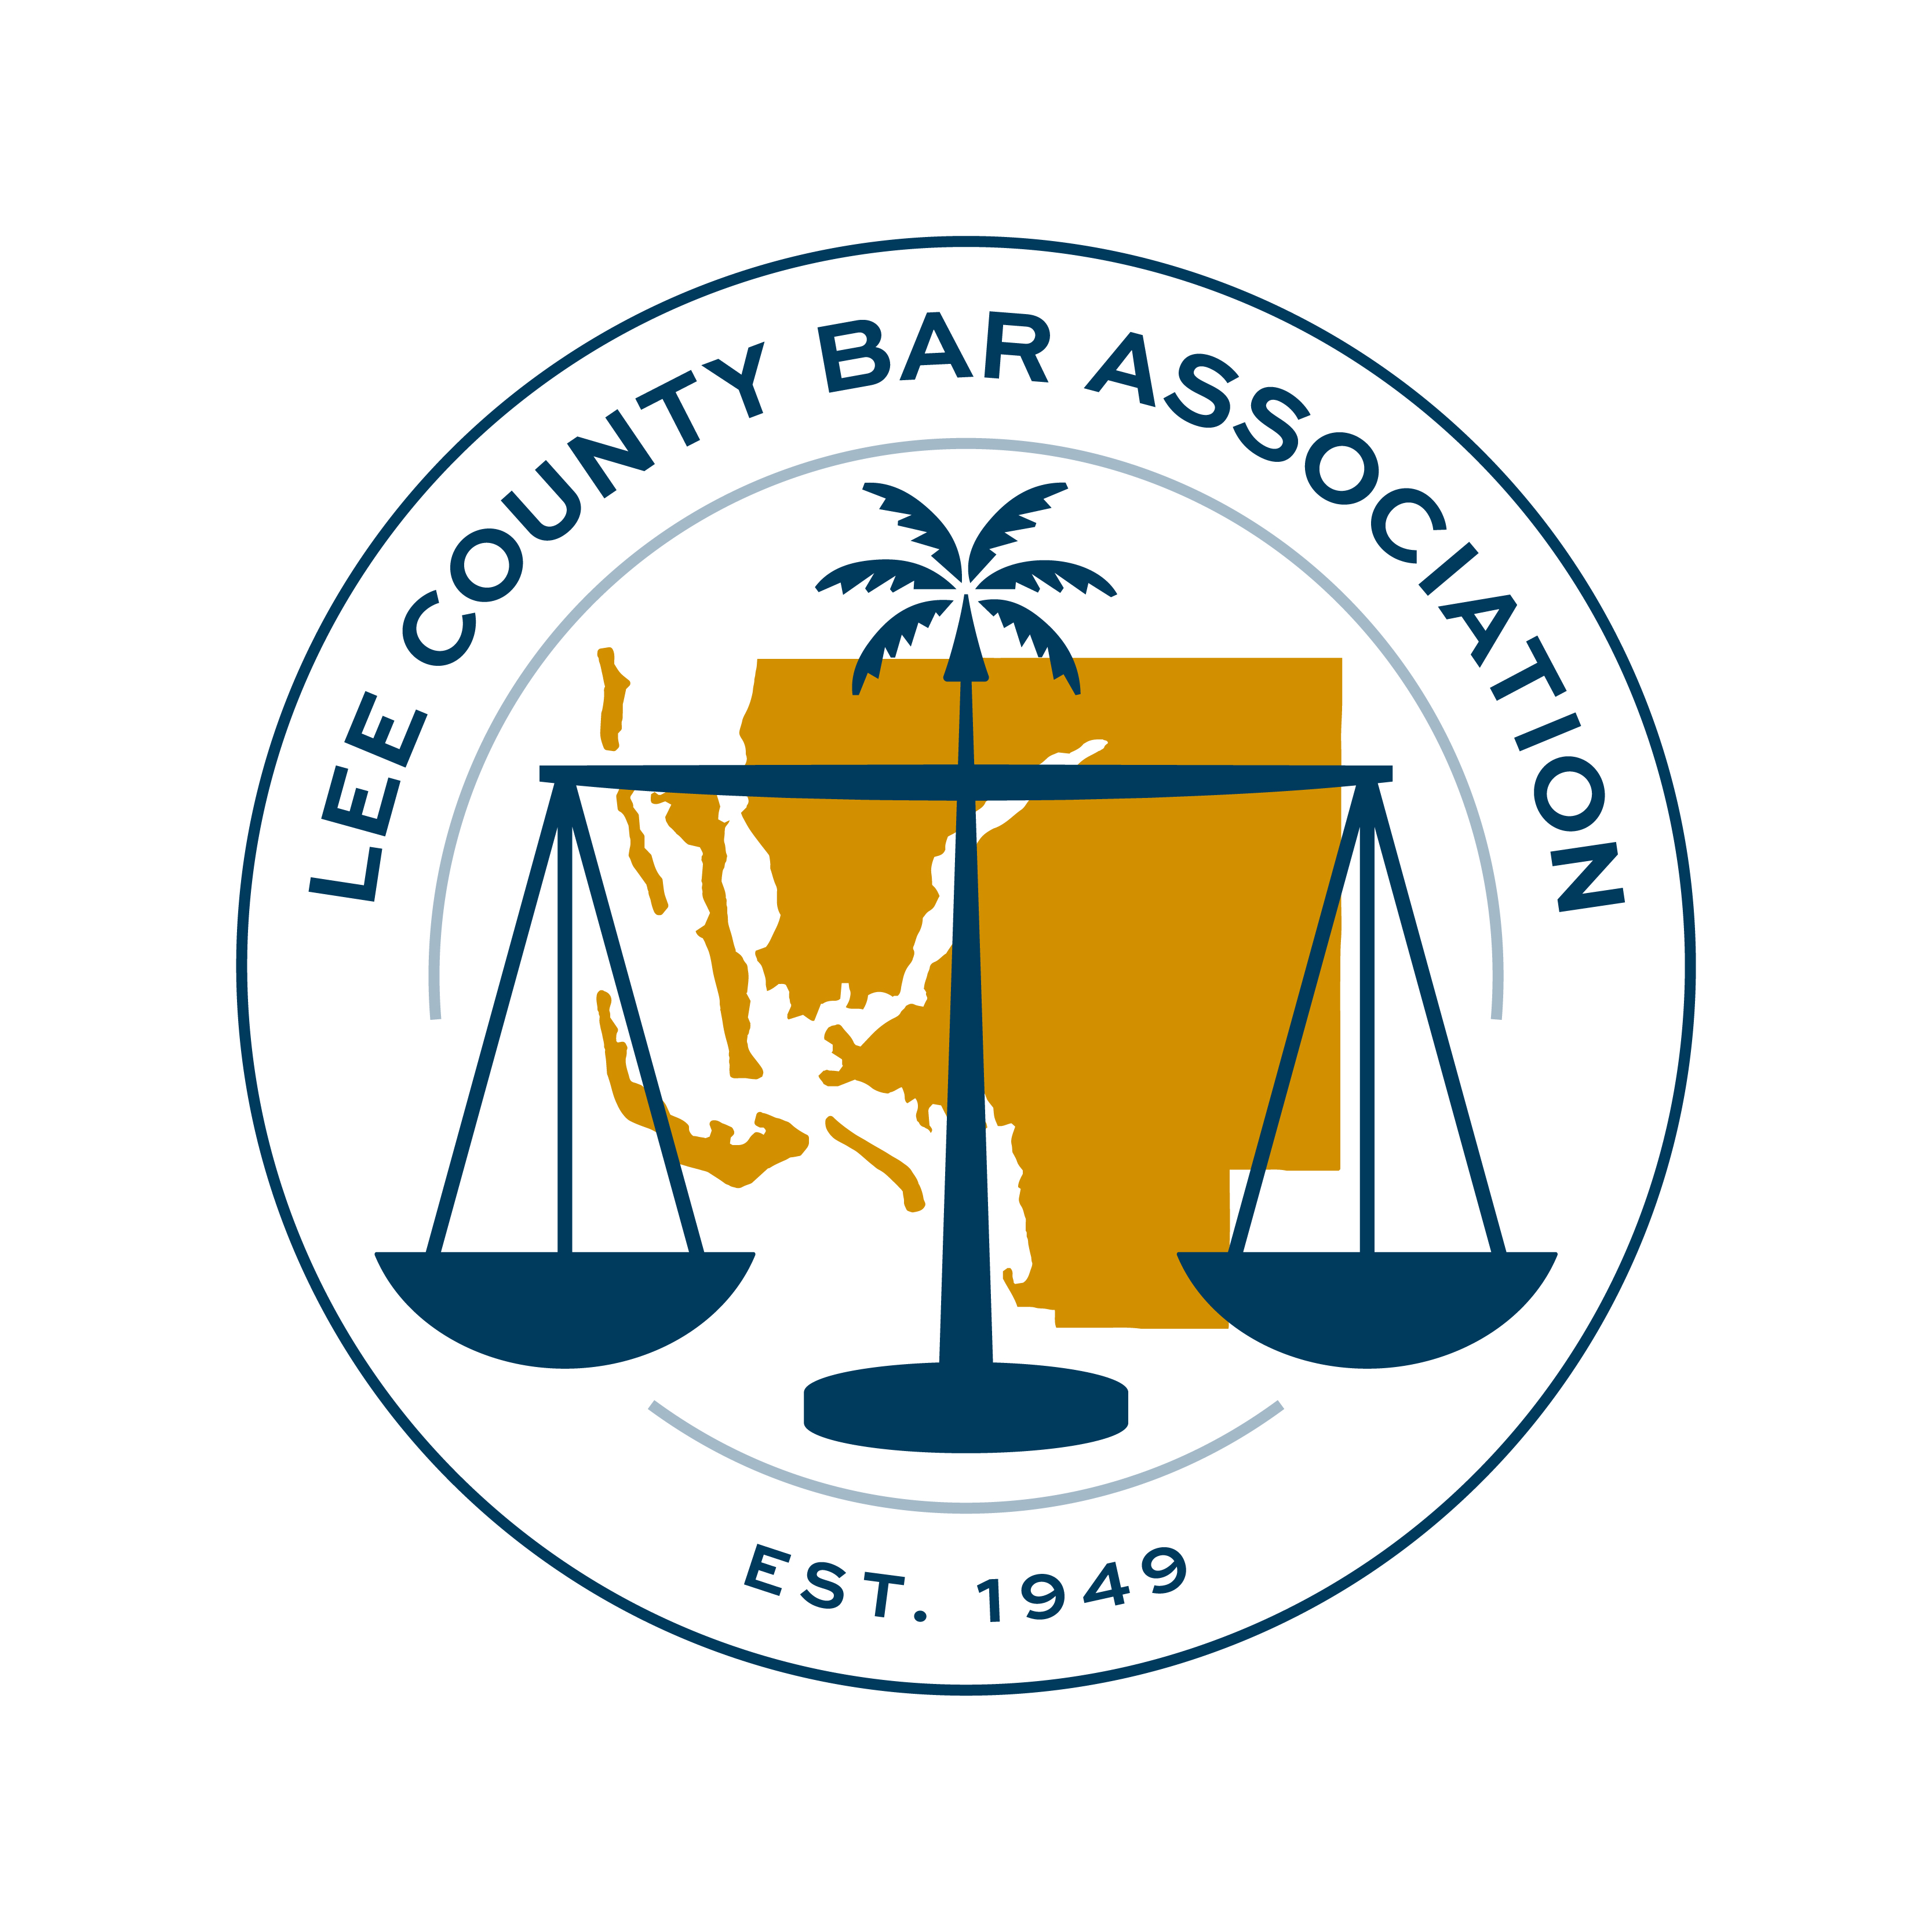 Lee County Clerk of Courts: Investigations 101: How to Search & E-Certify Court  Records Virtual CLE - Lee County Bar Association | Lee County, FL